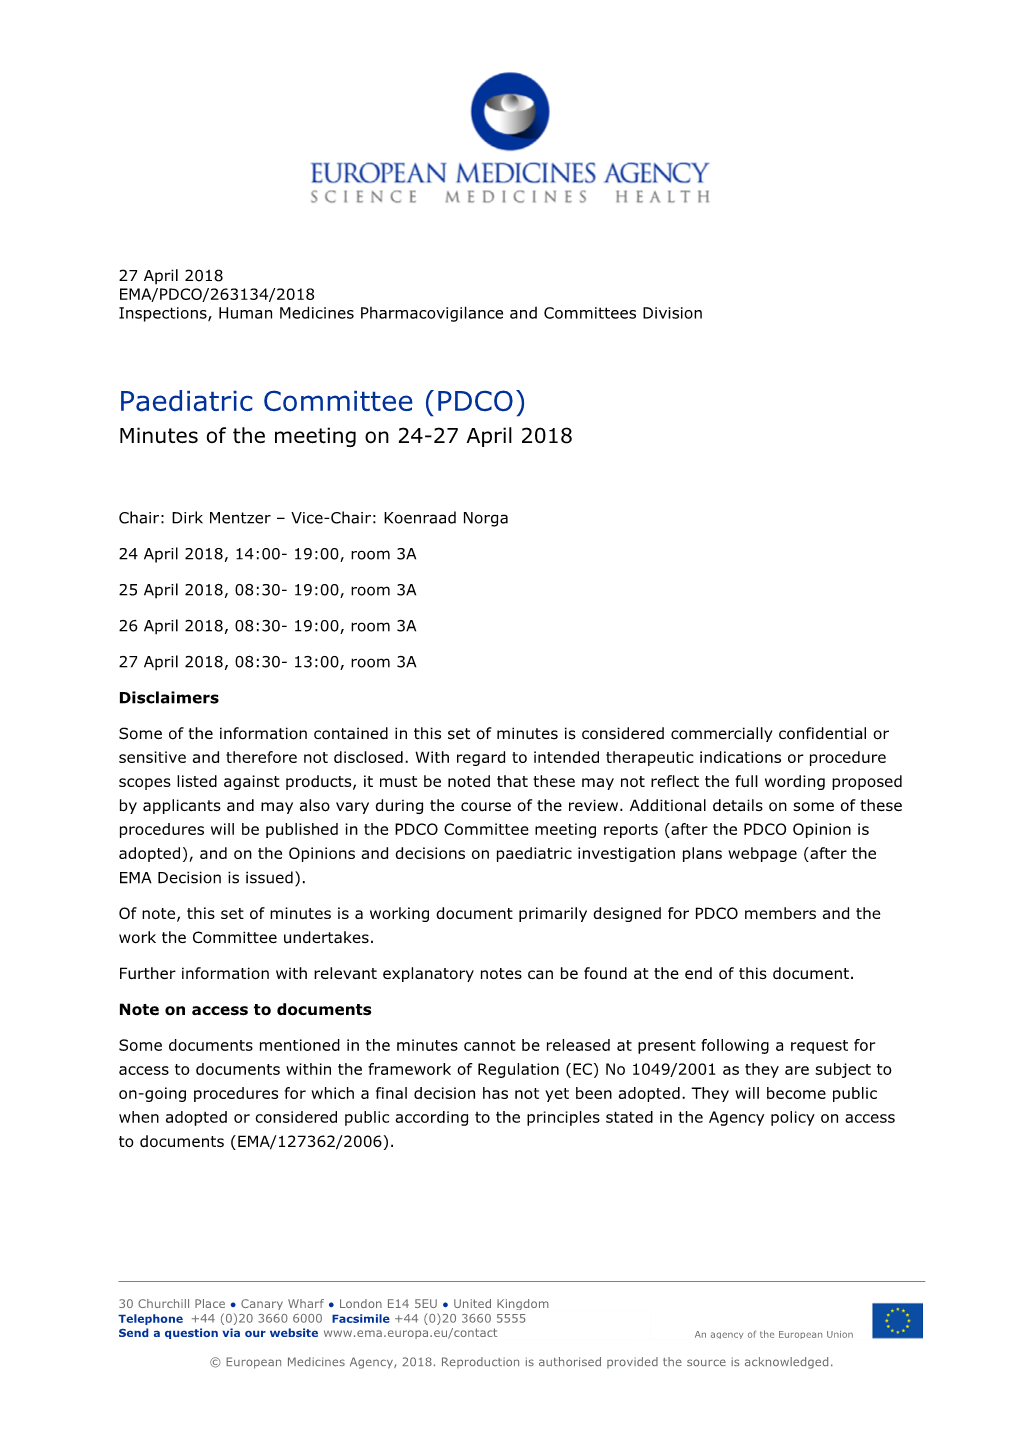 PDCO Minutes of the 24-27 April 2018 Meeting